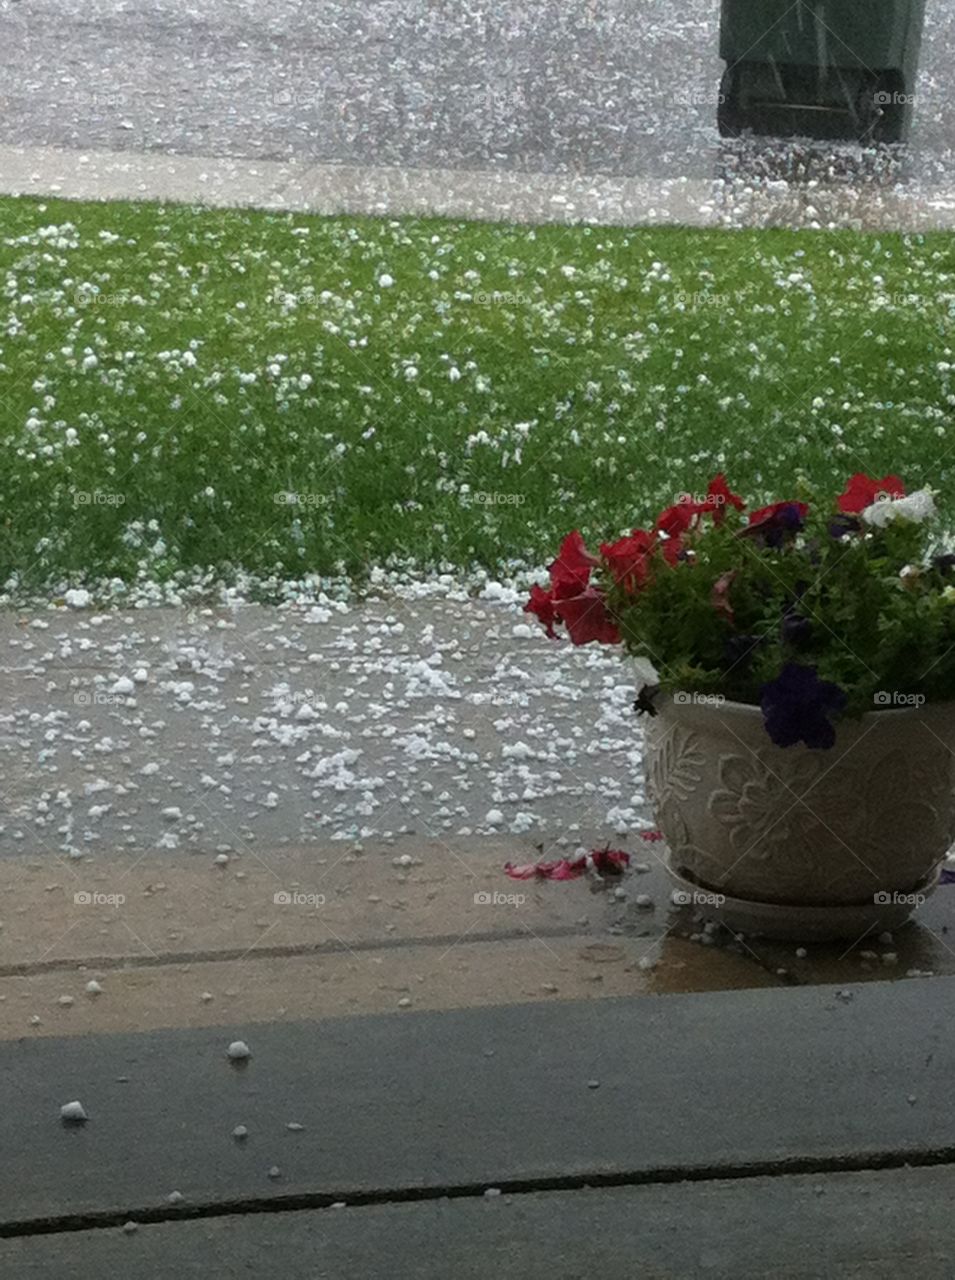 Hail in June. Northern Nevada. Weather changes quickly. Red petunias in a pot, green grass, white large pieces of hail.